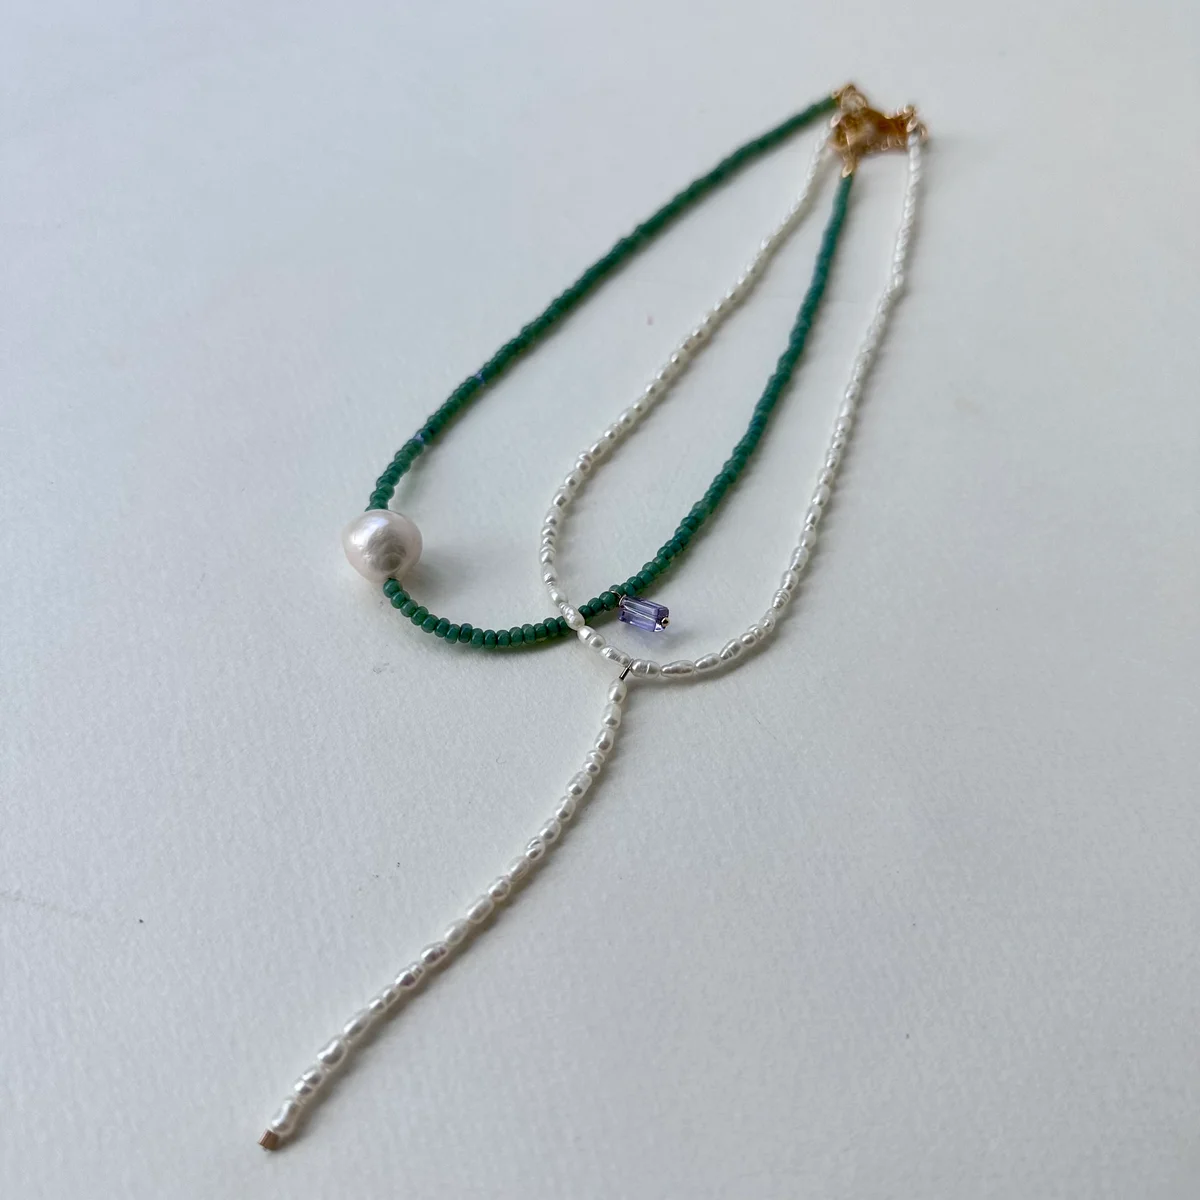 SEYCHELLES NECKLACE ・ST TROPEZ PEARL LARIAT ／BRIWOKのネックレス